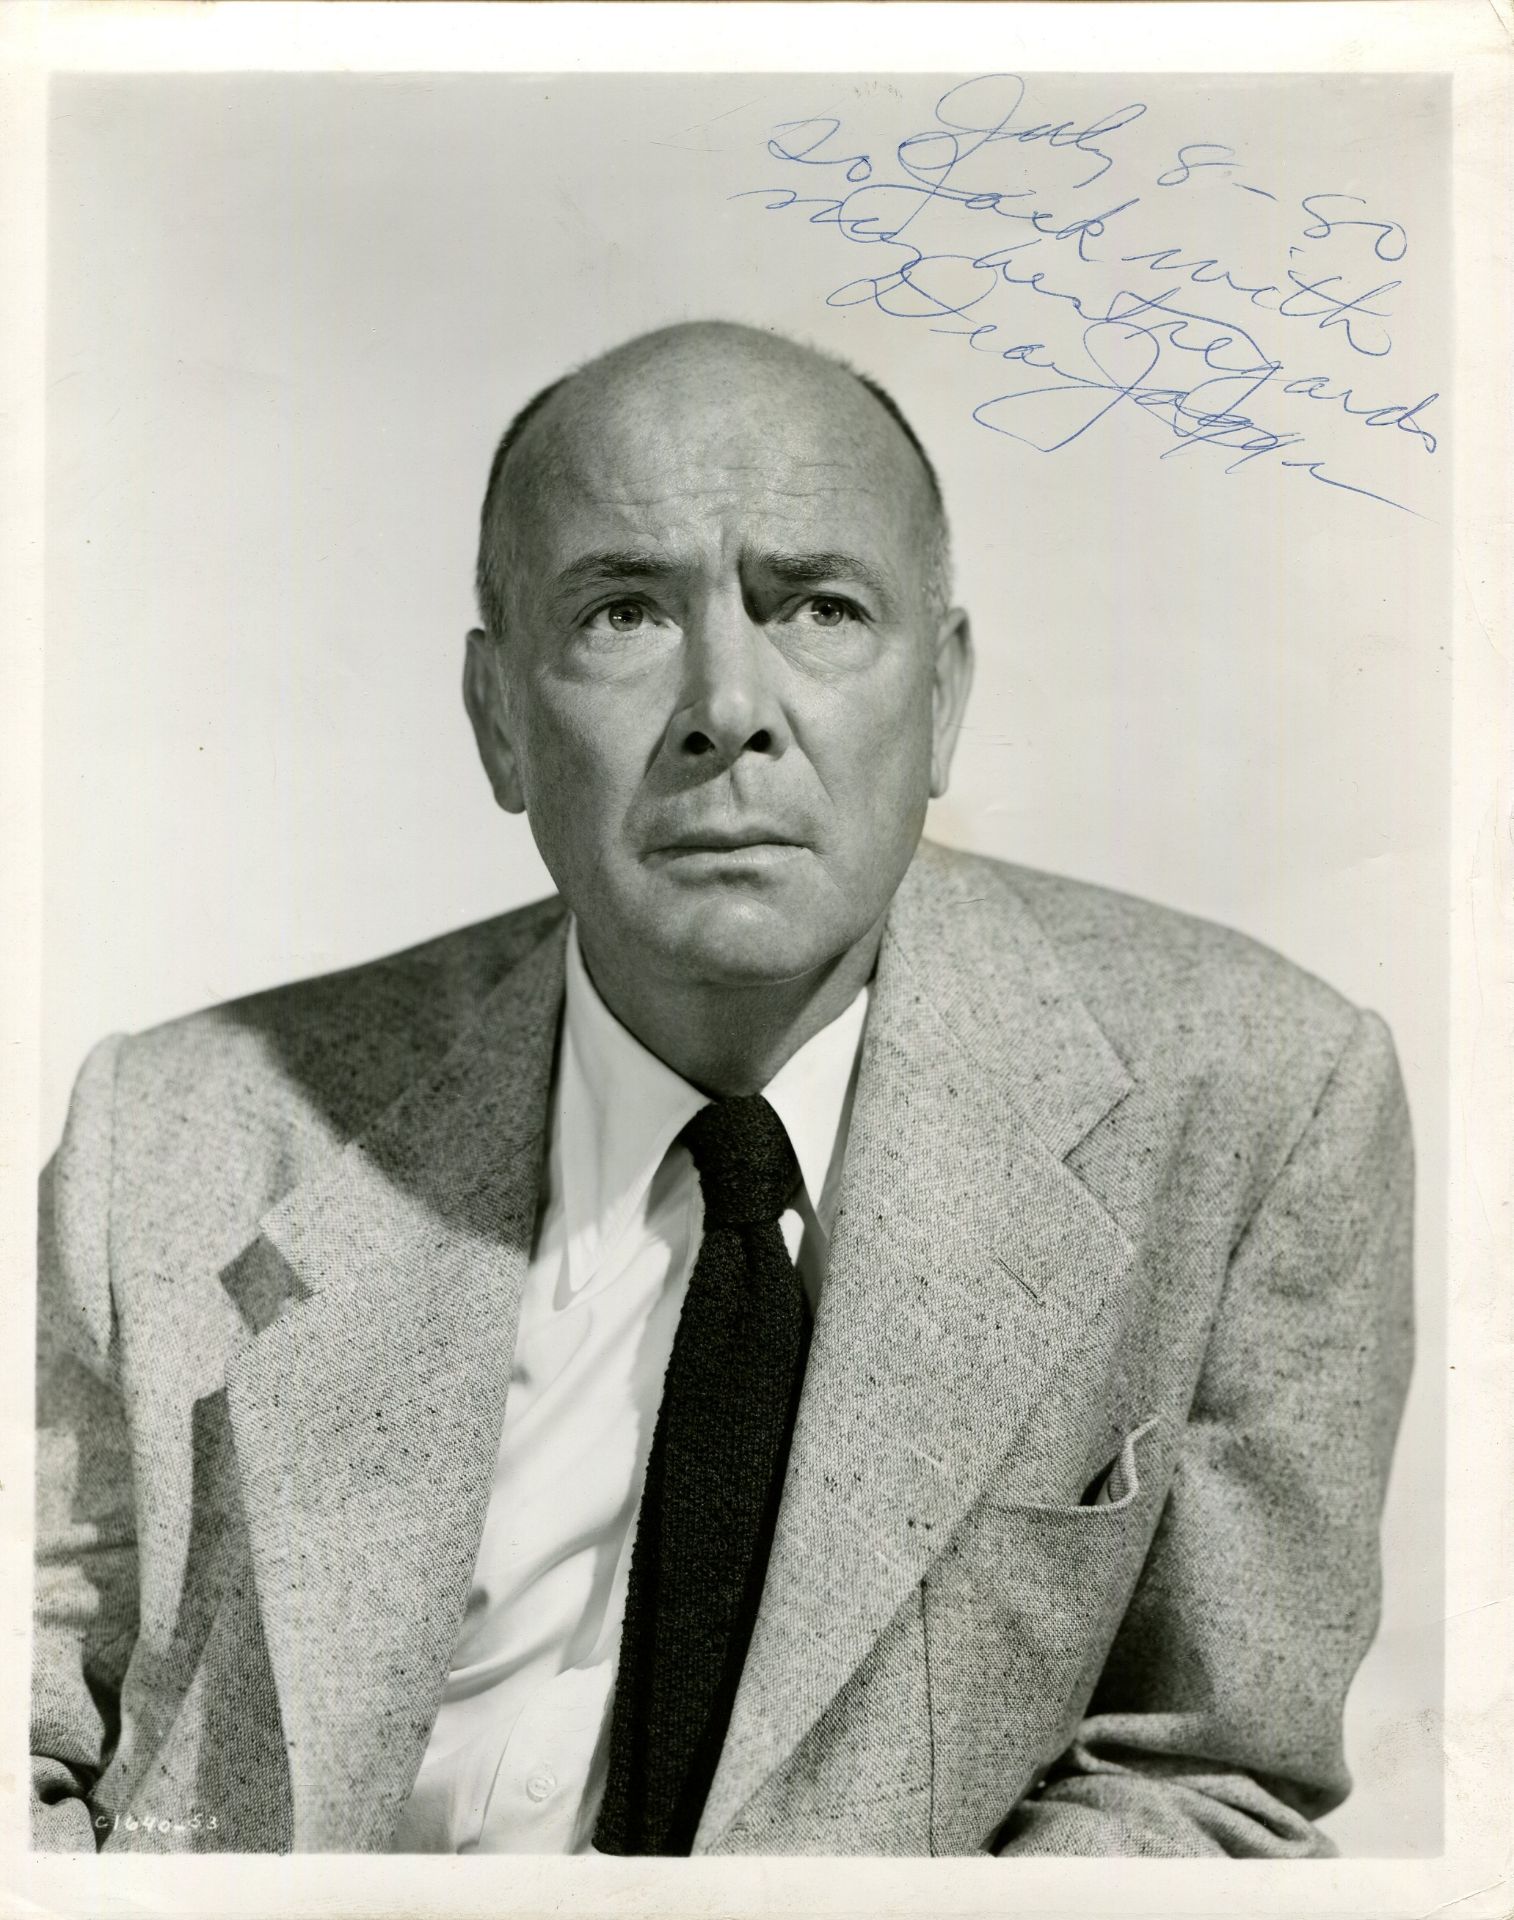 JAGGER DEAN: (1903-1991) American actor, Academy Award winner. Signed and inscribed 8 x 10